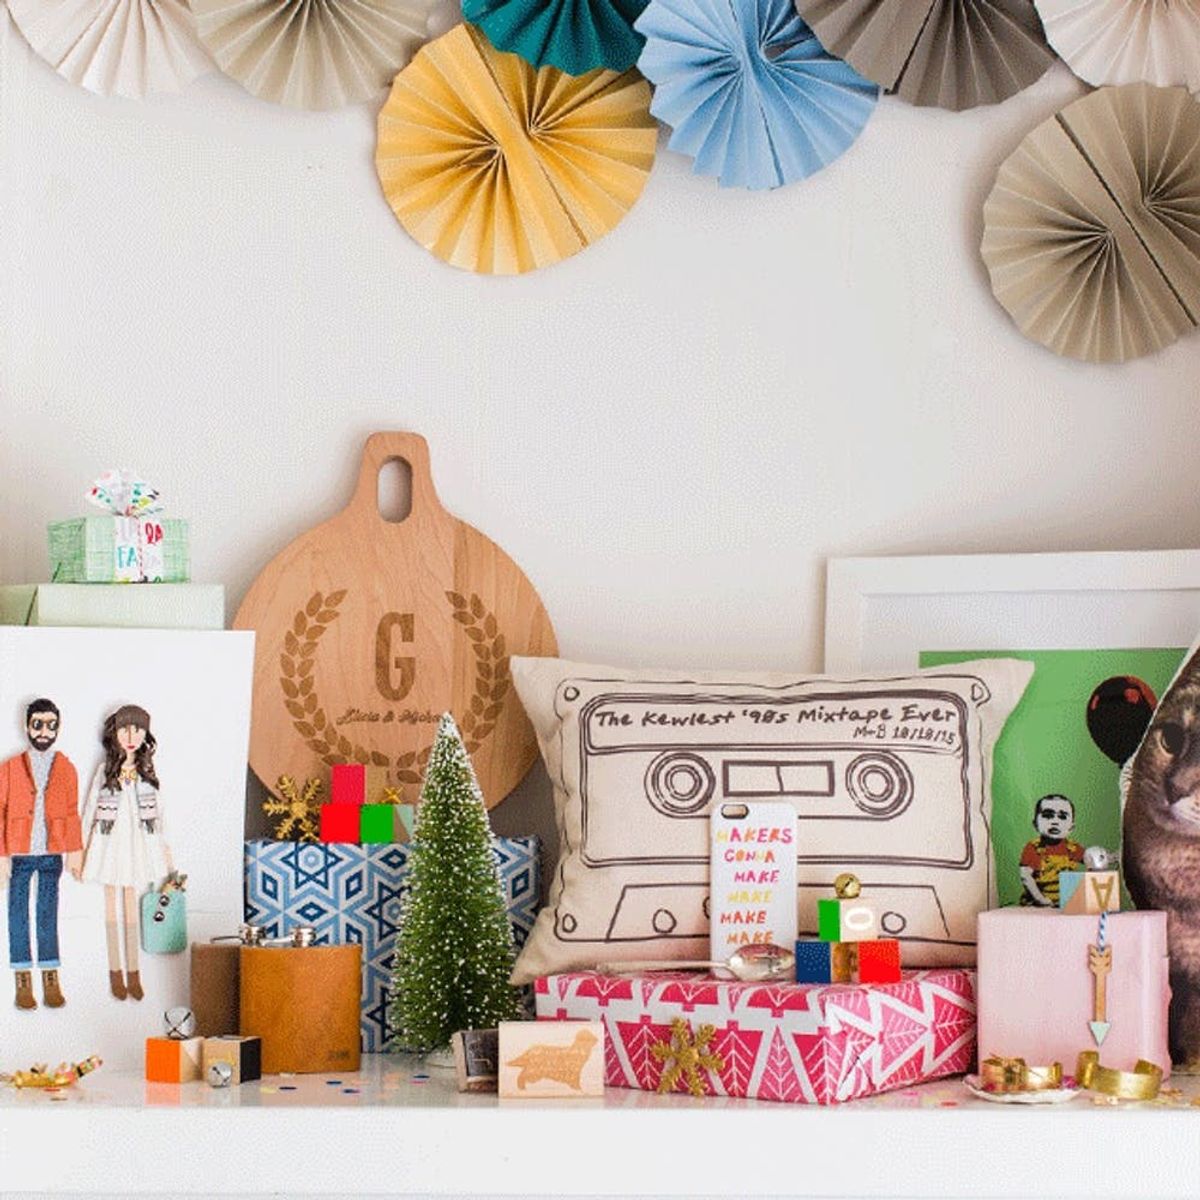 12 Items That Would Look SO Good on a Holiday Mantel